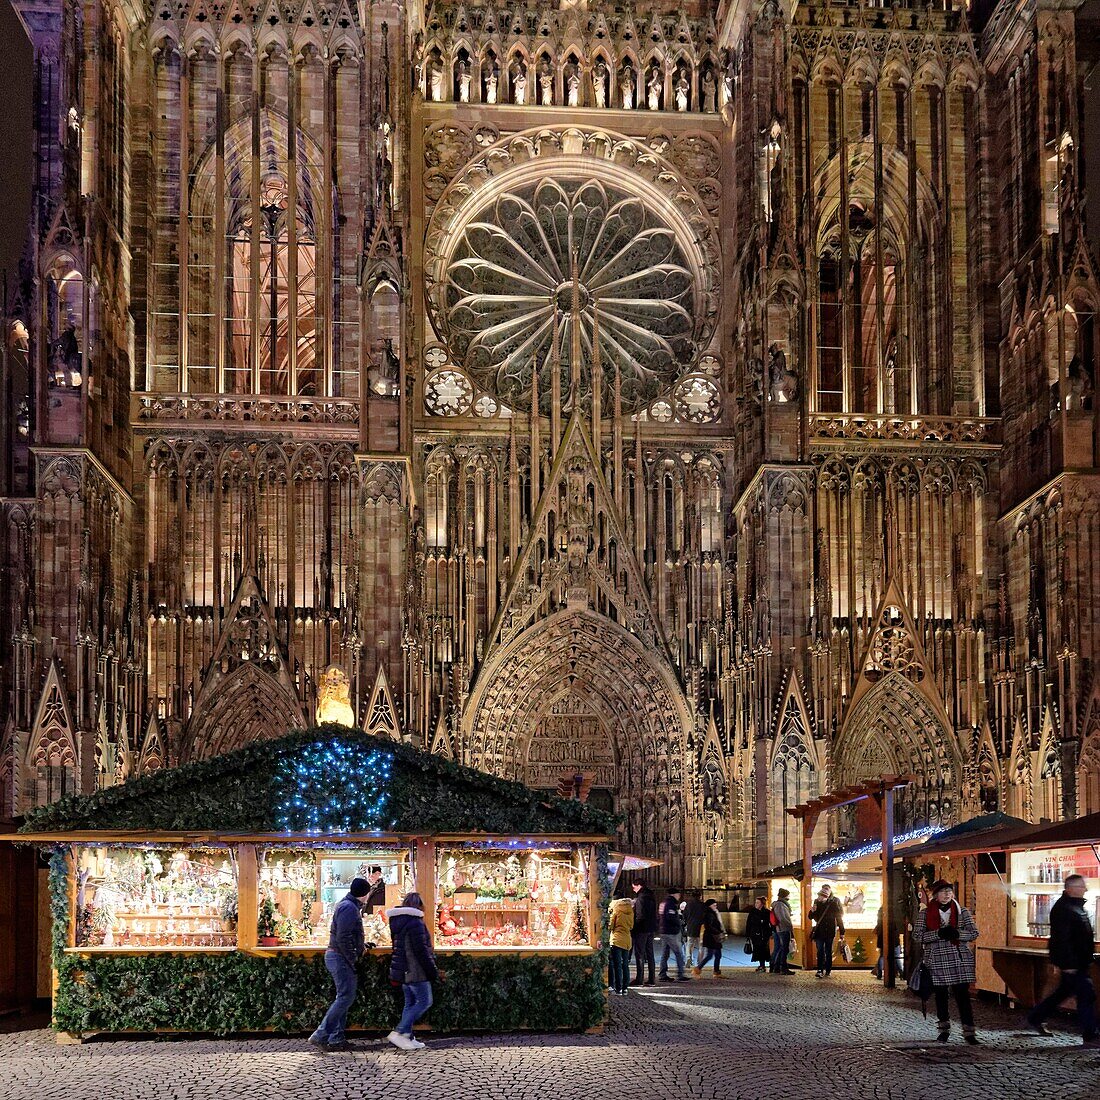 France, Bas Rhin, Strasbourg, old town listed as World Heritage by UNESCO, Christmas market (Christkindelsmarik) on place de la Cathedrale with Notre Dame Cathedral